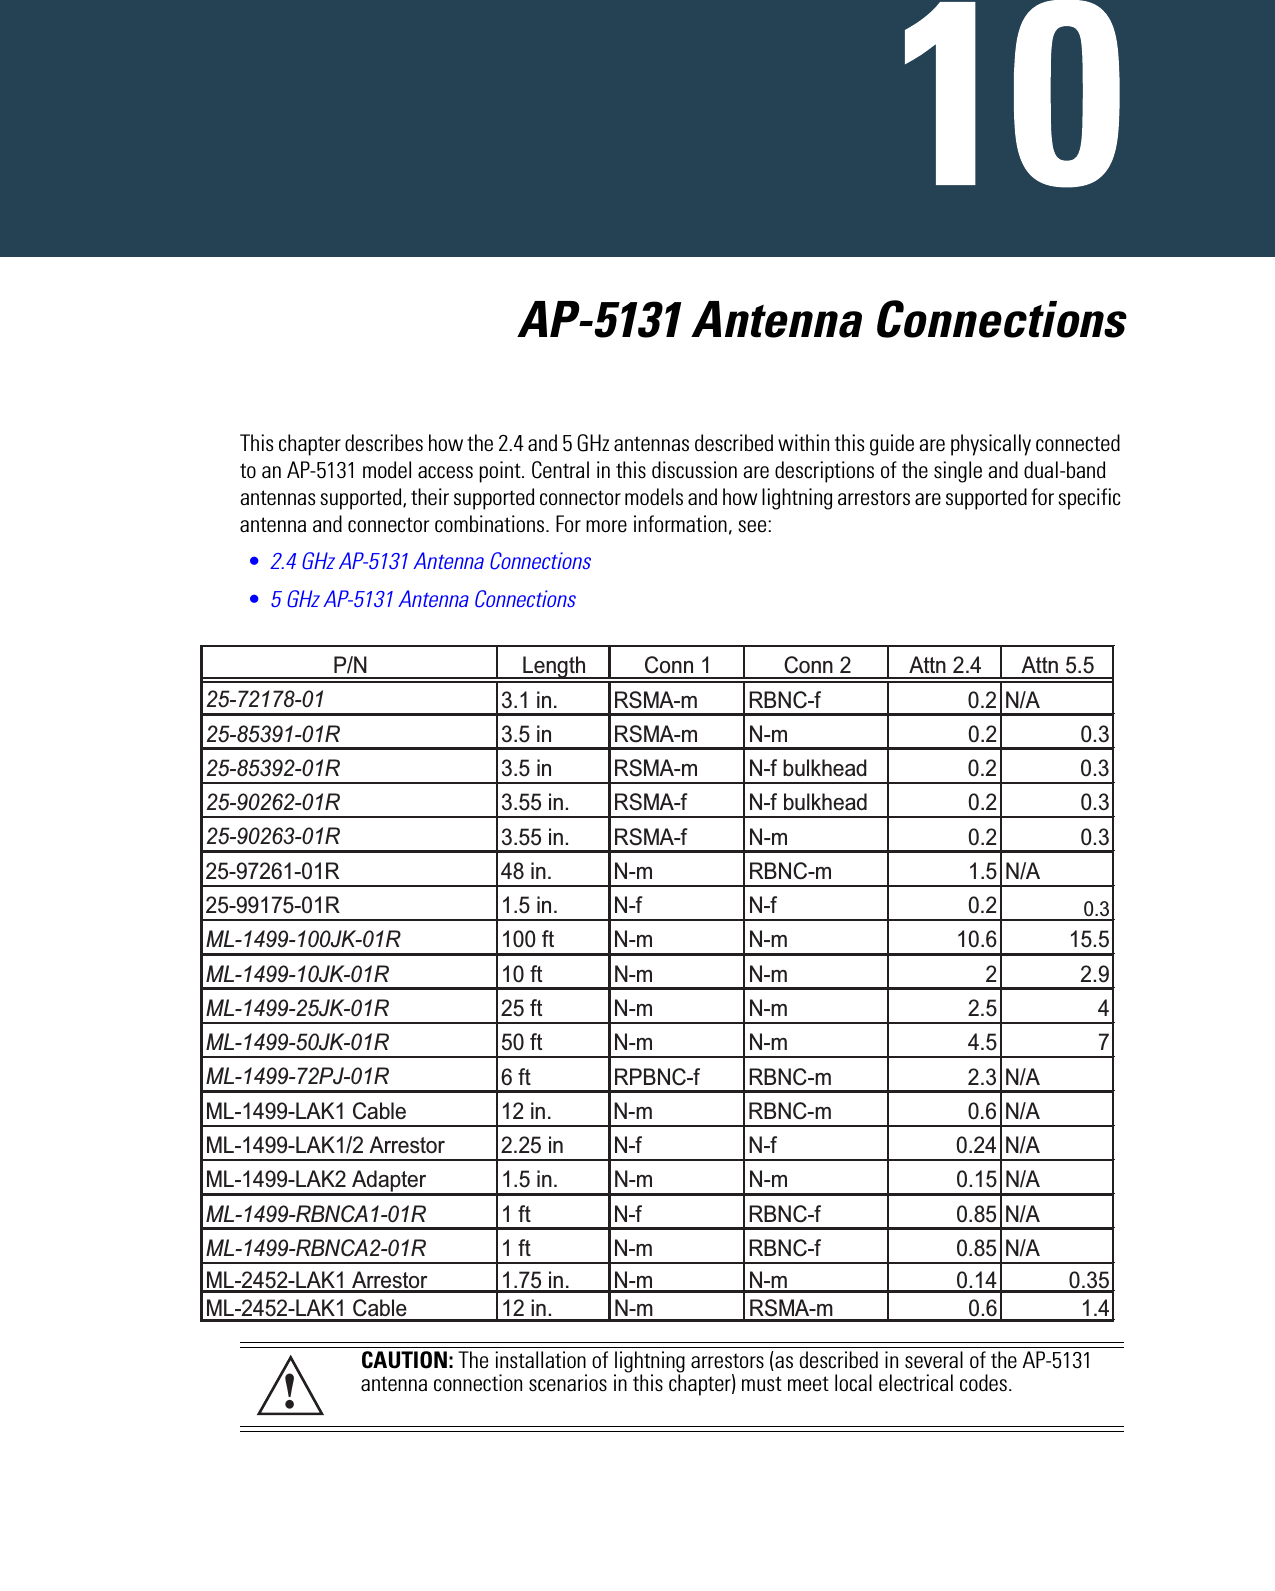   AP-5131 Antenna ConnectionsThis chapter describes how the 2.4 and 5 GHz antennas described within this guide are physically connected to an AP-5131 model access point. Central in this discussion are descriptions of the single and dual-band antennas supported, their supported connector models and how lightning arrestors are supported for specific antenna and connector combinations. For more information, see:•2.4 GHz AP-5131 Antenna Connections•5 GHz AP-5131 Antenna ConnectionsCAUTION: The installation of lightning arrestors (as described in several of the AP-5131 antenna connection scenarios in this chapter) must meet local electrical codes. P/N Length Conn 1 Conn 2 Attn 2.4 Attn 5.525-72178-01 3.1 in. RSMA-m RBNC-f 0.2 N/A25-85391-01R 3.5 in RSMA-m N-m 0.2 0.325-85392-01R 3.5 in RSMA-m N-f bulkhead 0.2 0.325-90262-01R 3.55 in. RSMA-f N-f bulkhead 0.2 0.325-90263-01R 3.55 in. RSMA-f N-m 0.2 0.325-97261-01R 48 in. N-m RBNC-m 1.5 N/A25-99175-01R 1.5 in. N-f N-f 0.20.3ML-1499-100JK-01R 100 ft N-m N-m 10.6 15.5ML-1499-10JK-01R 10 ft N-m N-m 2 2.9ML-1499-25JK-01R 25 ft N-m N-m 2.5 4ML-1499-50JK-01R 50 ft N-m N-m 4.5 7ML-1499-72PJ-01R 6 ft RPBNC-f RBNC-m 2.3 N/AML-1499-LAK1 Cable 12 in. N-m RBNC-m 0.6 N/AML-1499-LAK1/2 Arrestor 2.25 in N-f N-f 0.24 N/AML-1499-LAK2 Adapter 1.5 in. N-m N-m 0.15 N/AML-1499-RBNCA1-01R 1 ft N-f RBNC-f 0.85 N/AML-1499-RBNCA2-01R 1 ft N-m RBNC-f 0.85 N/AML-2452-LAK1 Arrestor 1.75 in. N-m N-m 0.14 0.35ML-2452-LAK1 Cable 12 in. N-m RSMA-m 0.6 1.4!